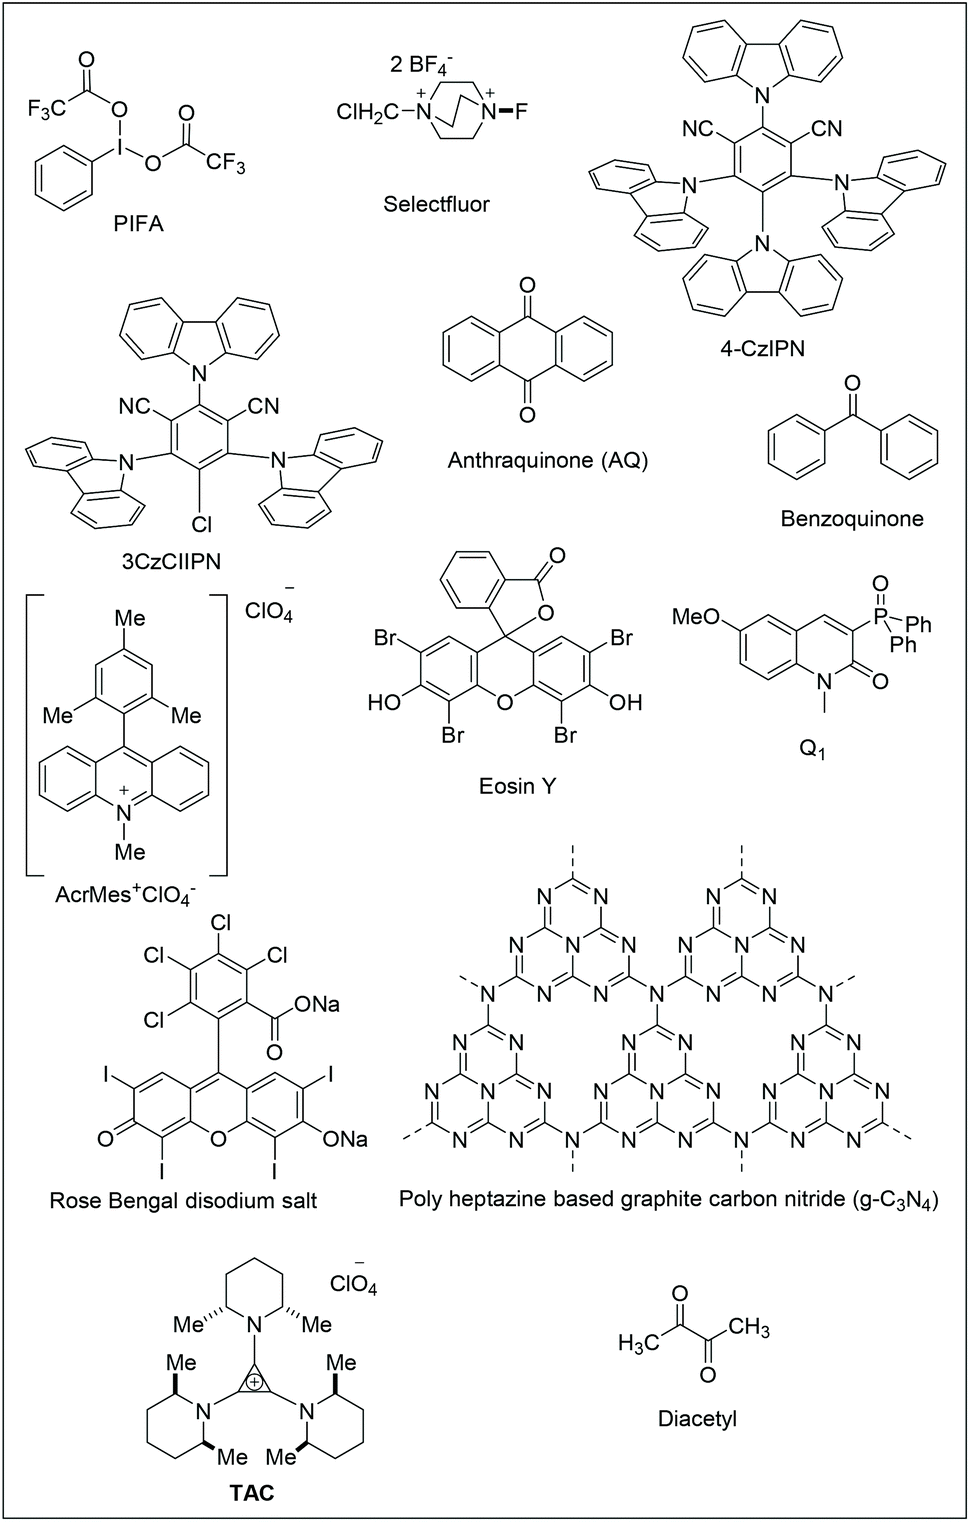 Chemical structures of tetrahydrofuran (THF) and dibenzyl ether (DBE).... |  Download Scientific Diagram